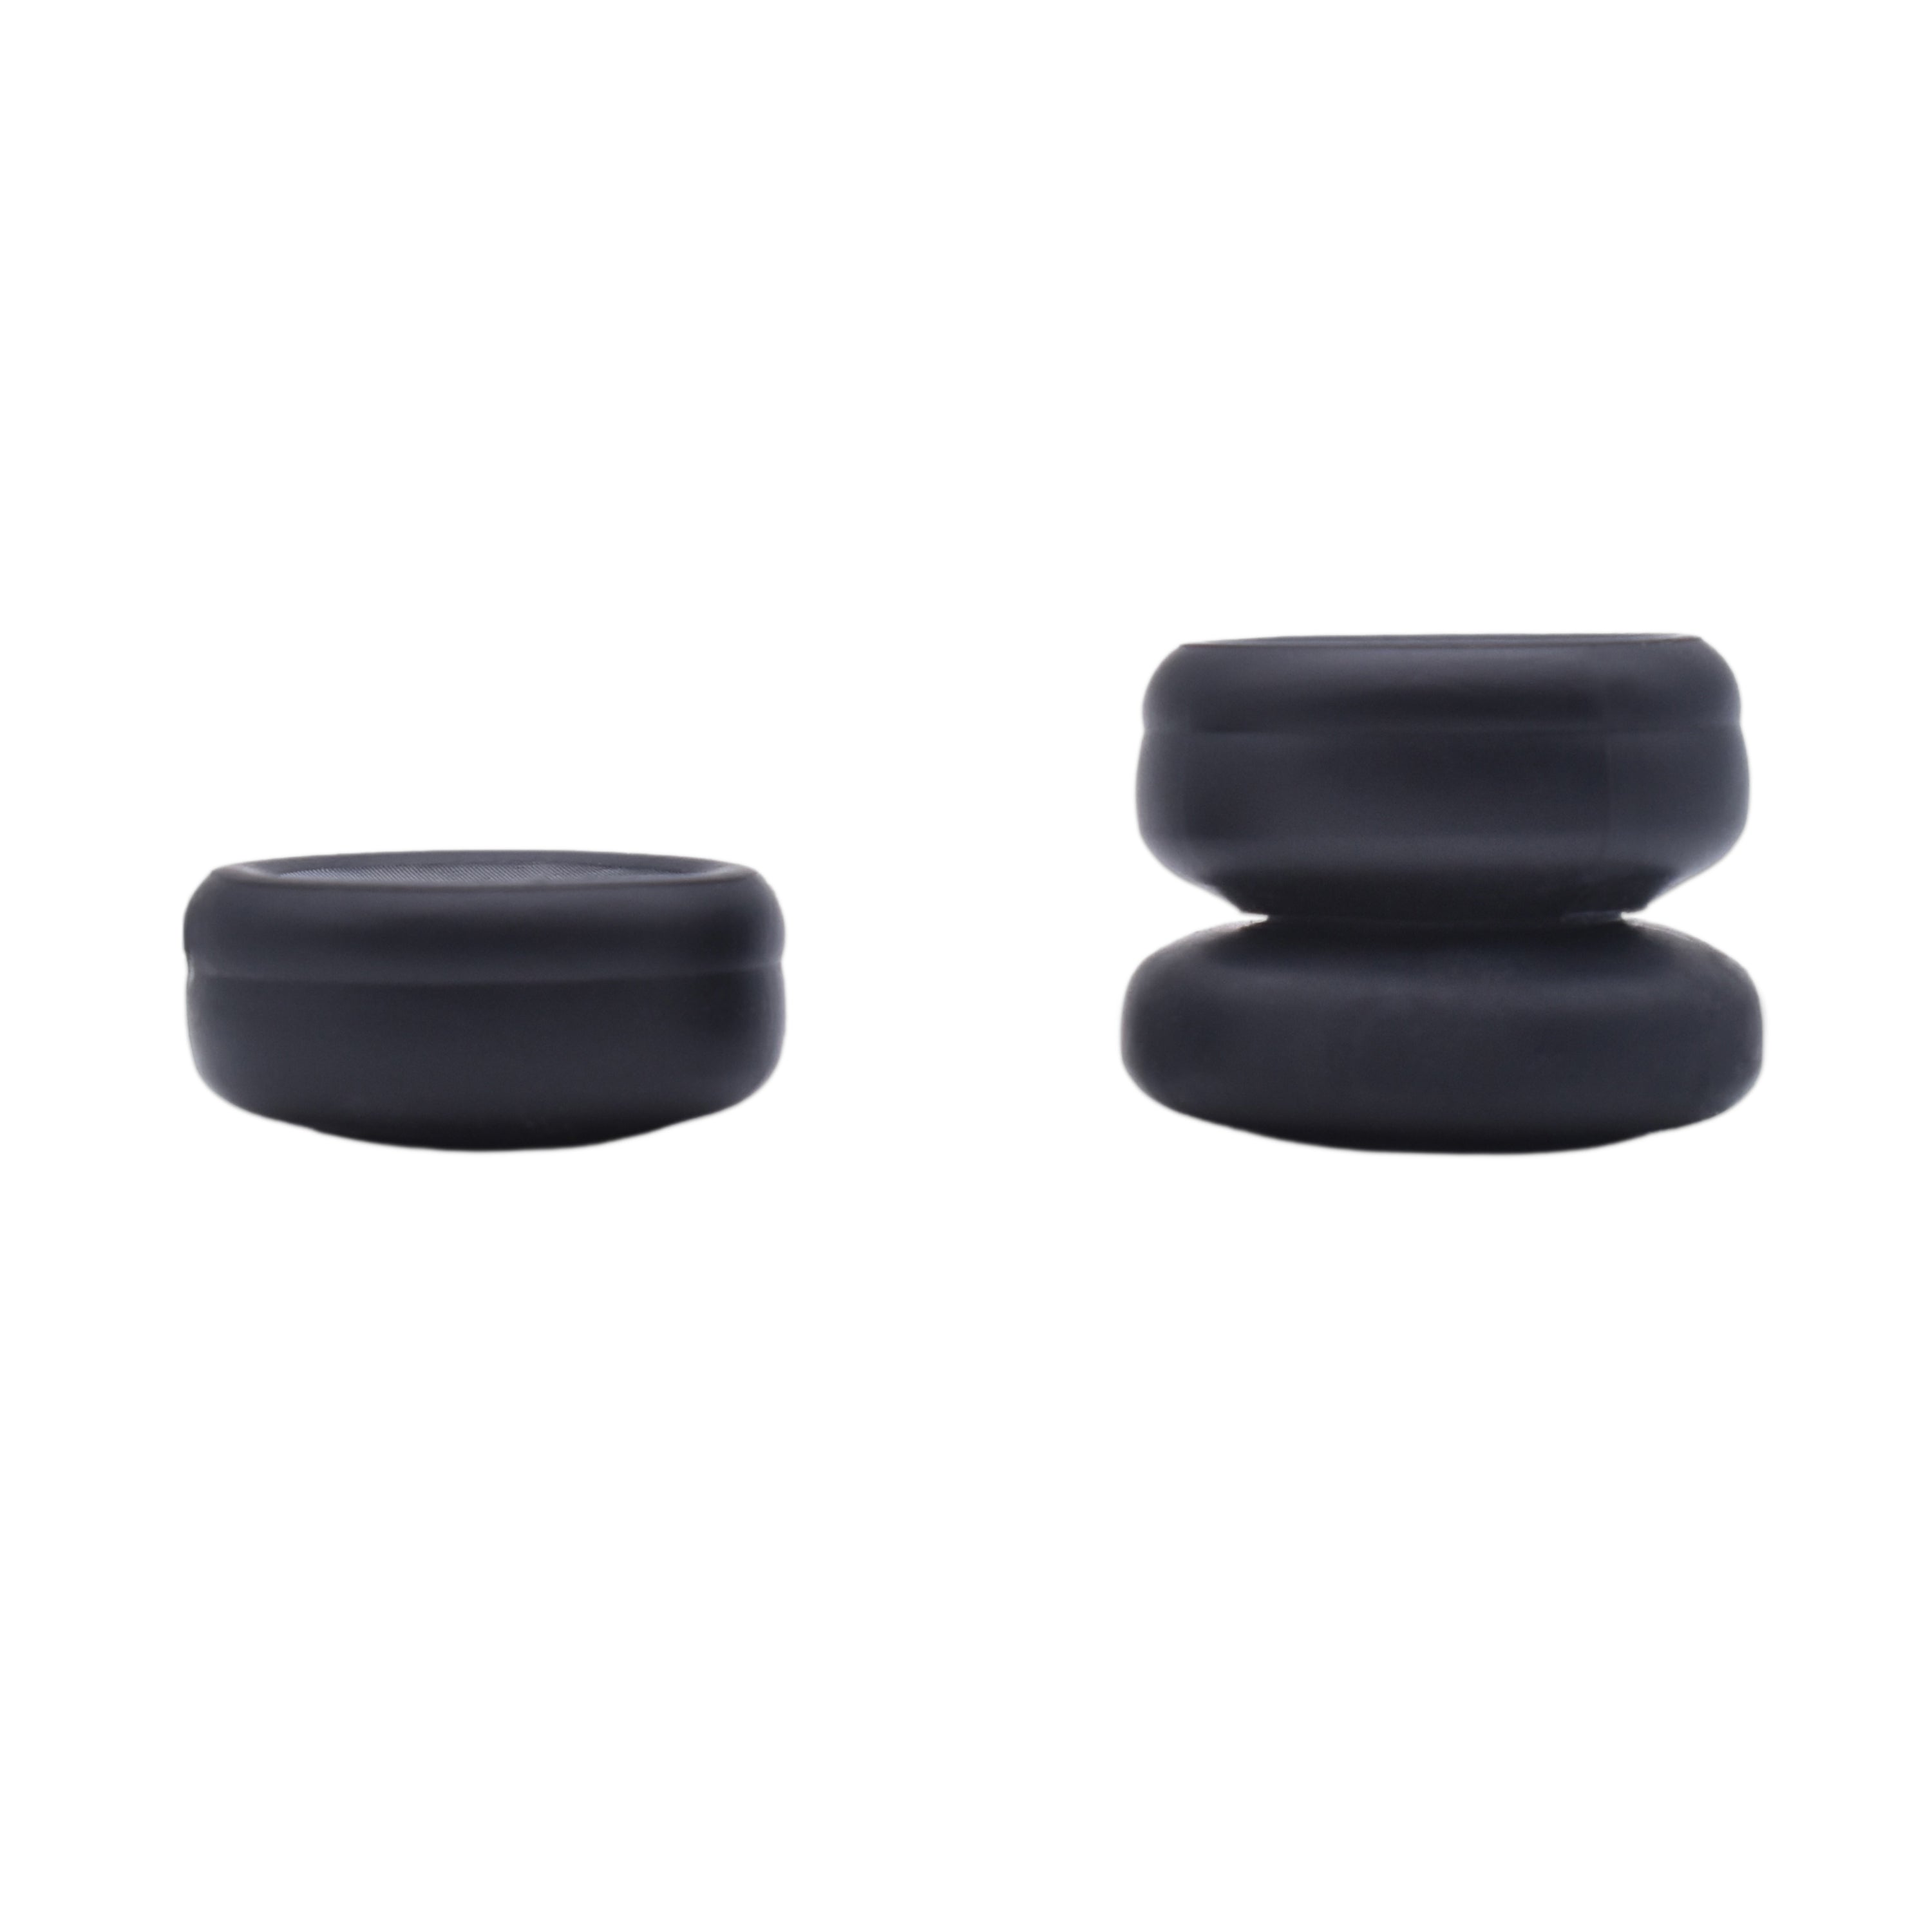 Setex® Thumbstick Grips - For PS4, PS5, Xbox and Switch